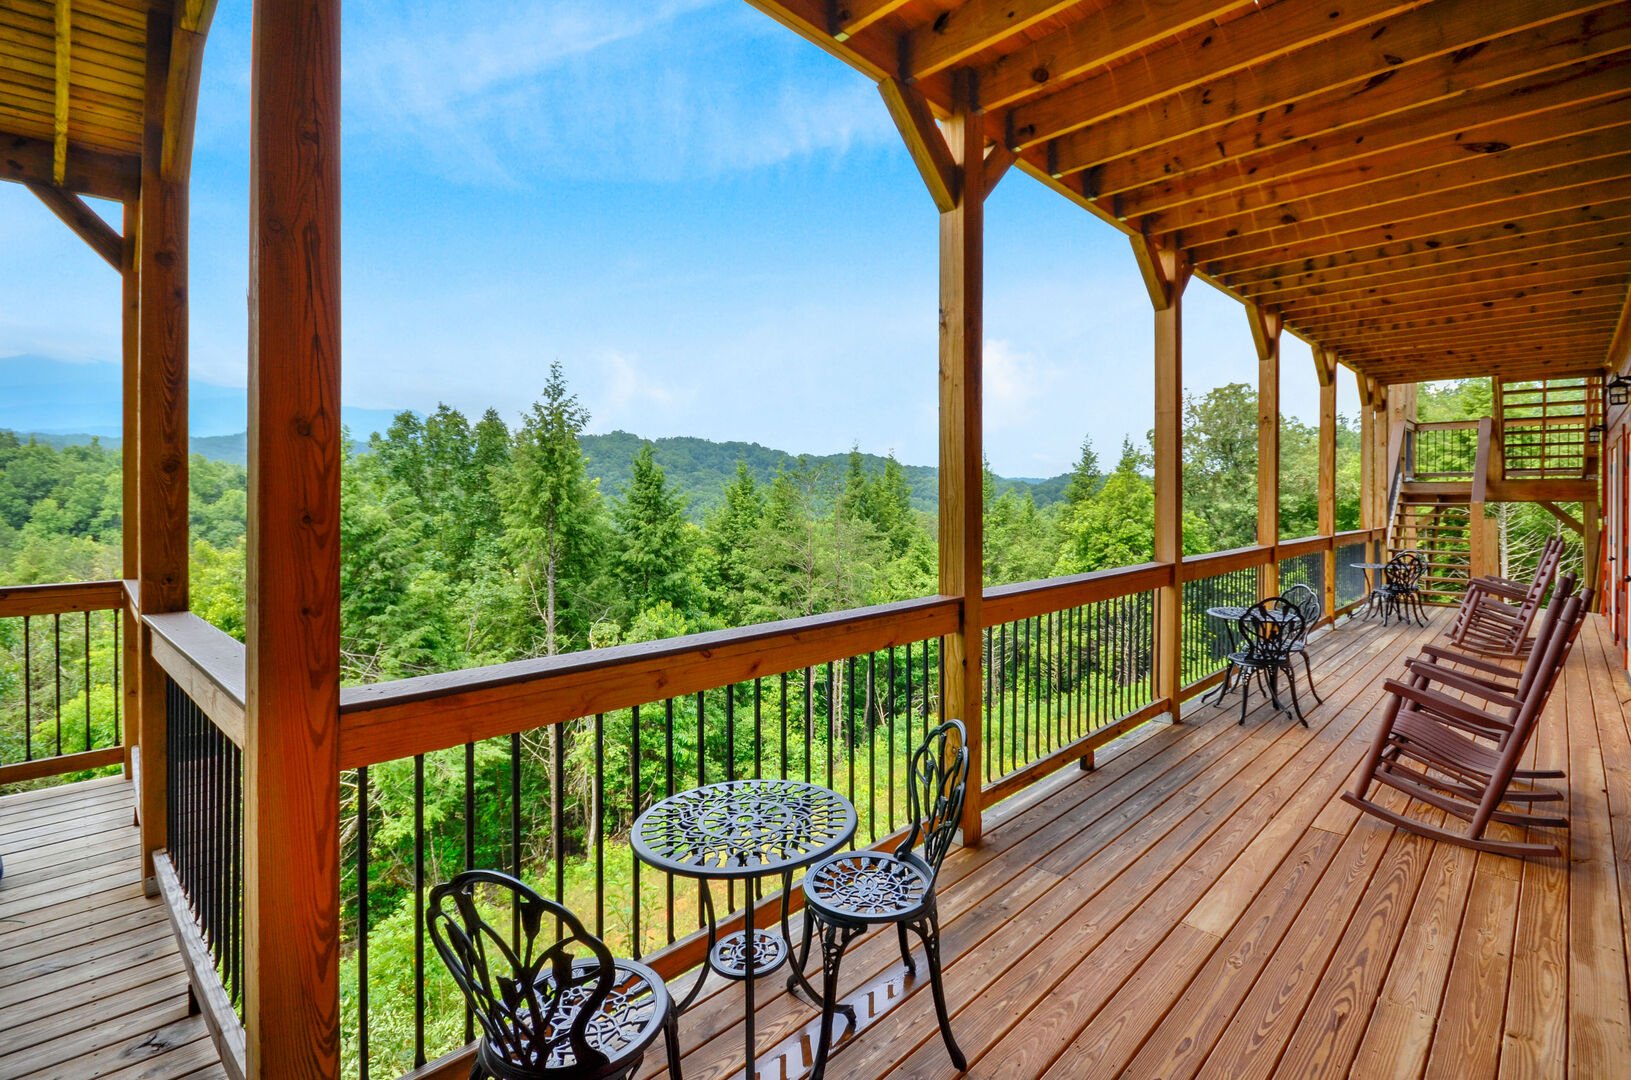 The balcony of this Vacation rental near Gatlinburg TN with seating and great views.